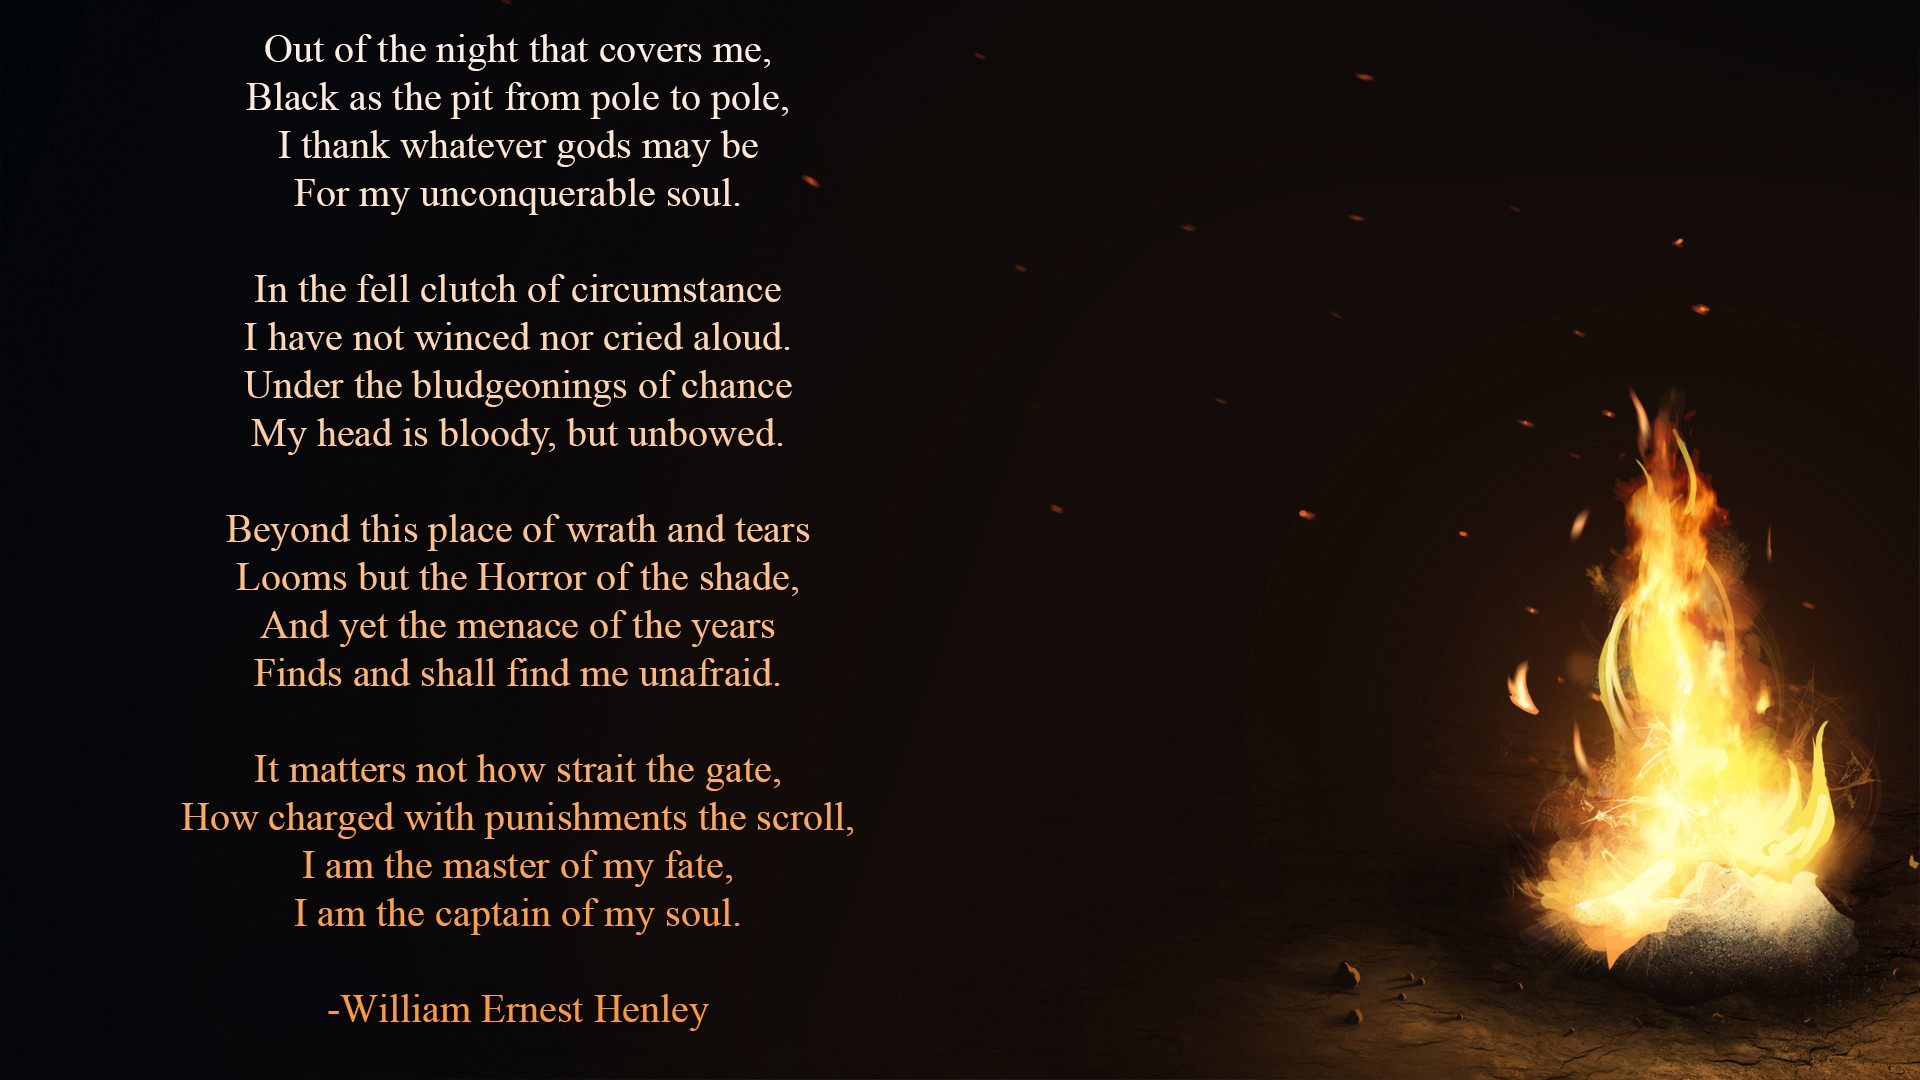 Invictus Poetry Fire Text Writing 1920x1080